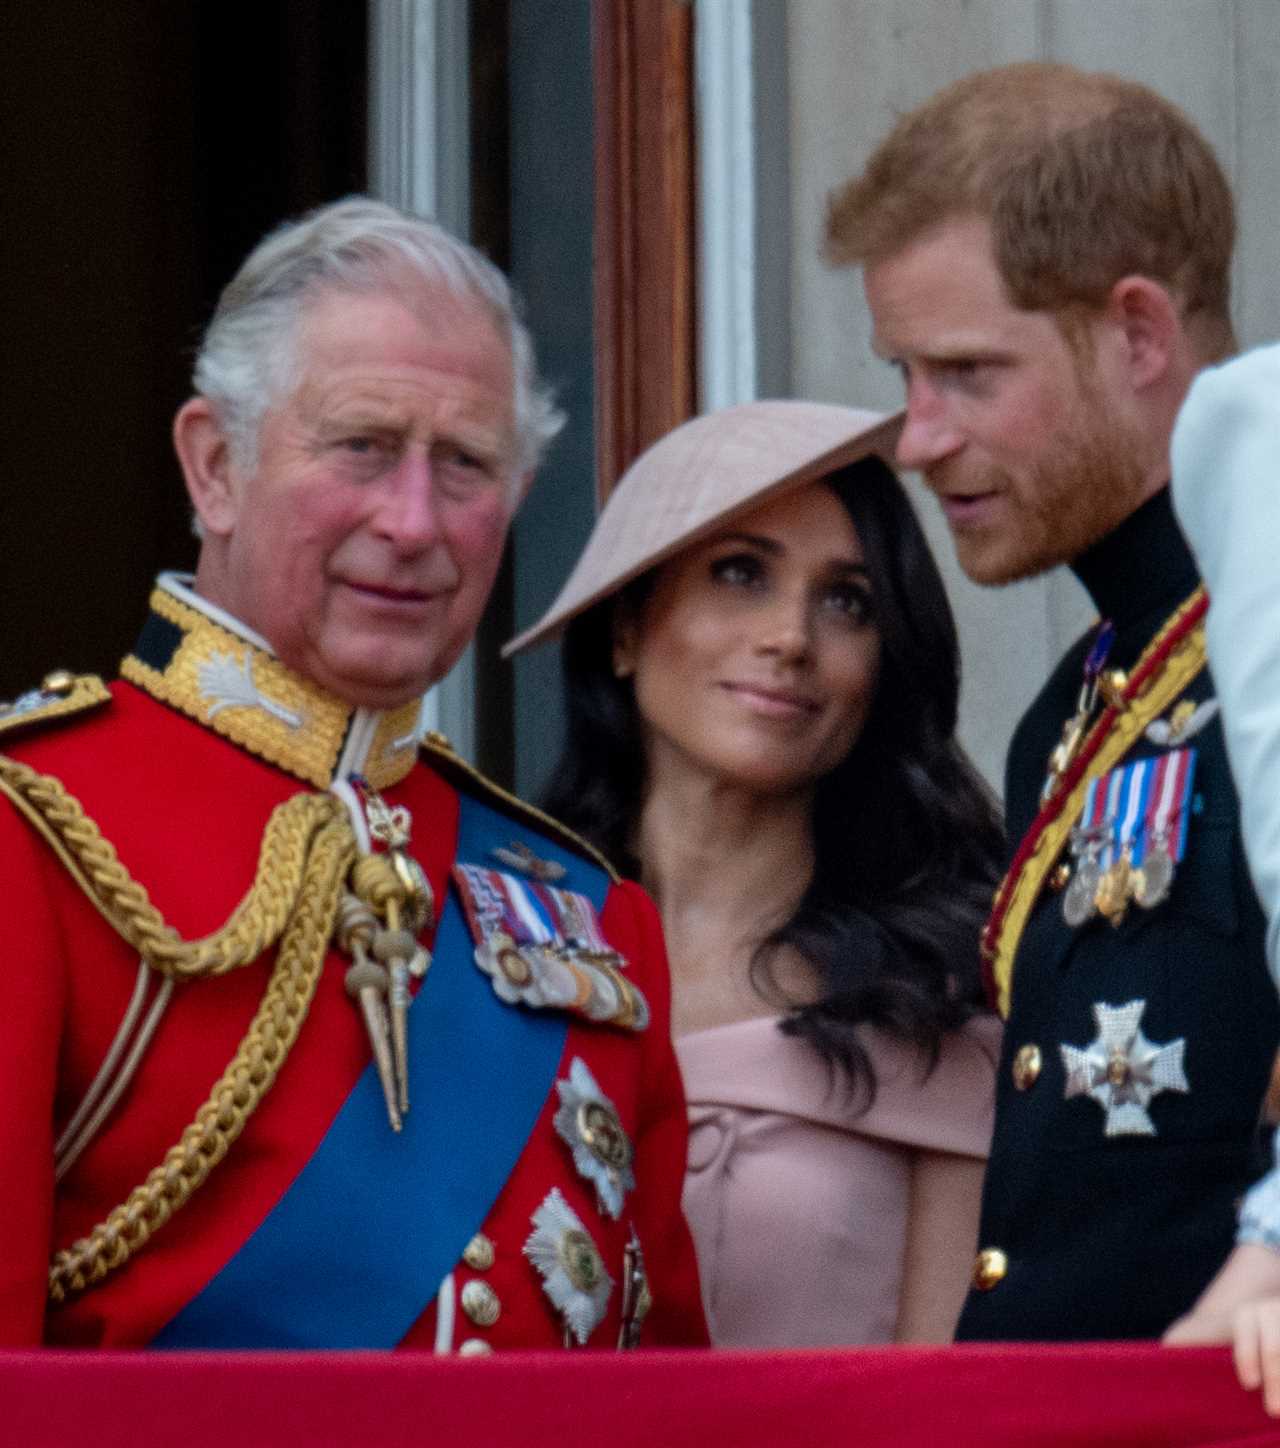 Real reason why King Charles evicted Meghan Markle and Harry from Frogmore after son ‘crossed a line’, sources claim